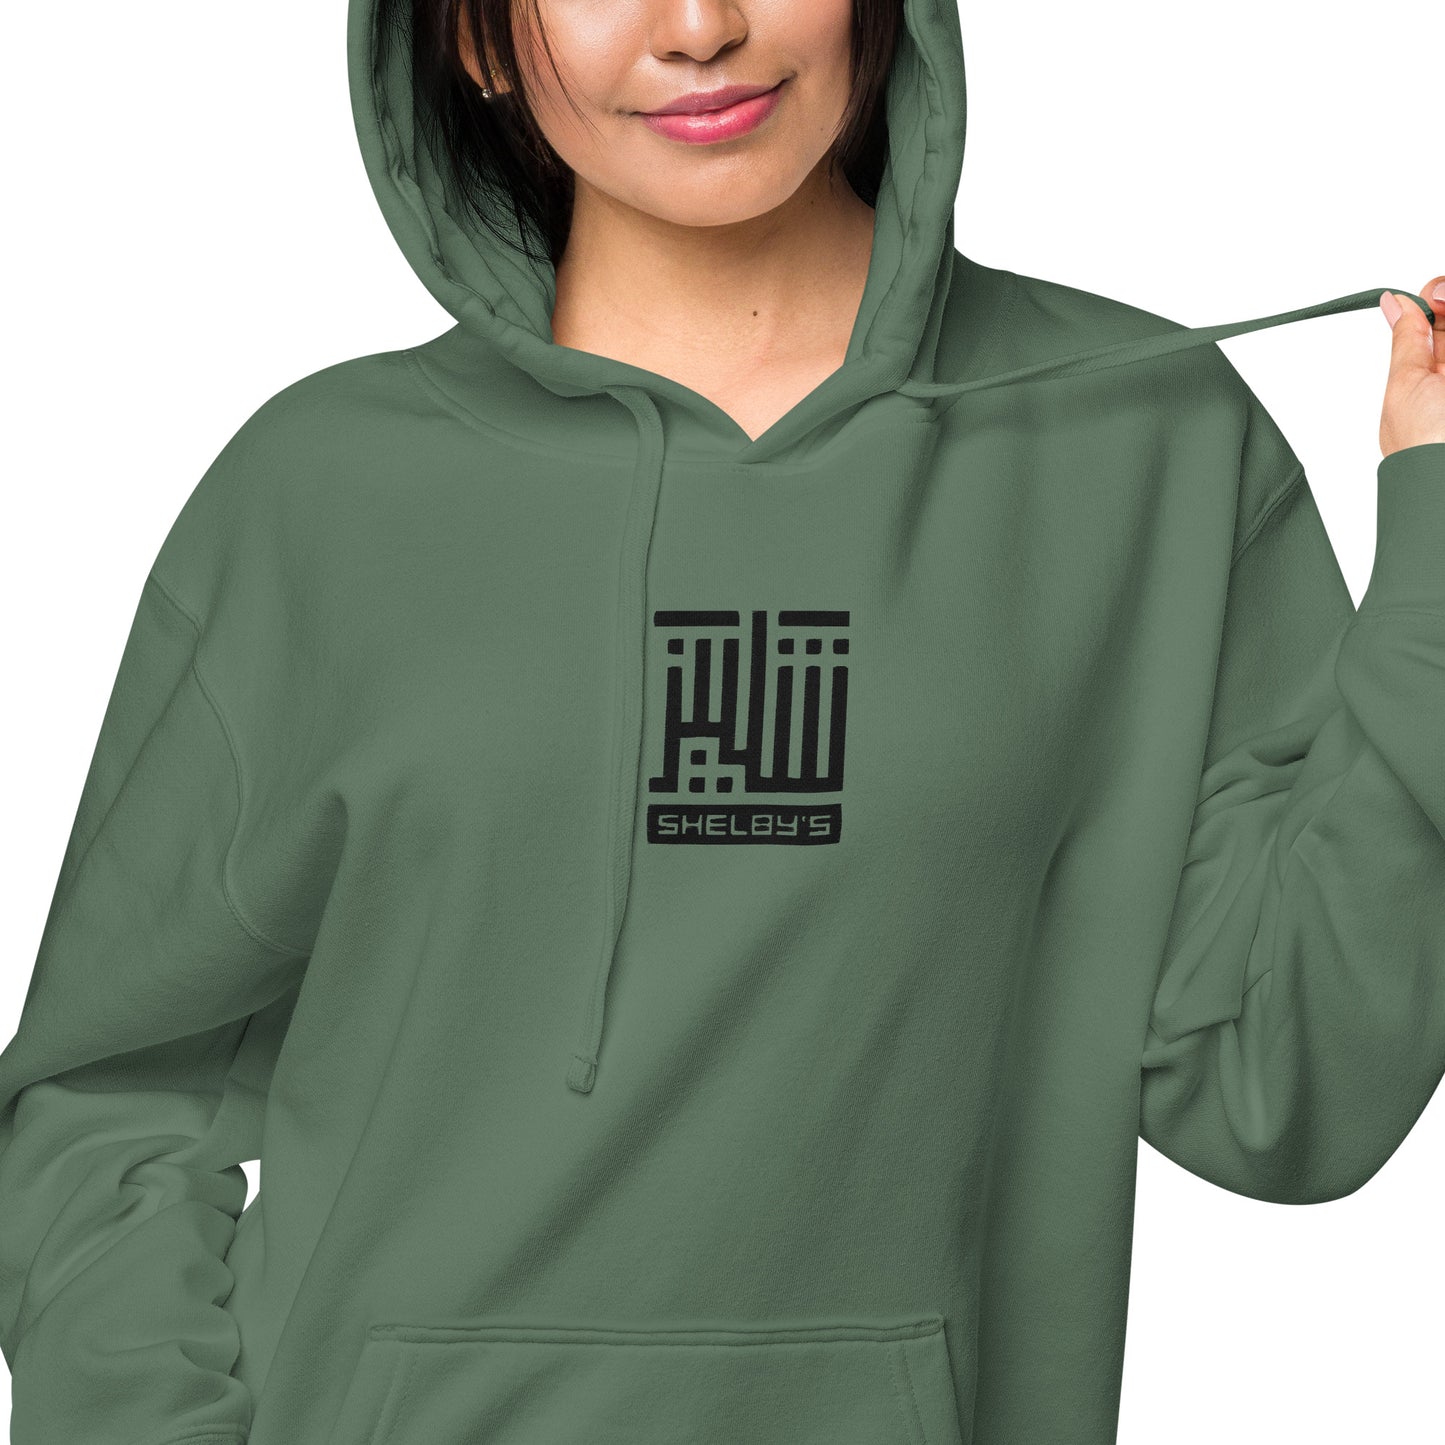 Shelby's Arabic Square - Embroidered Hoodie